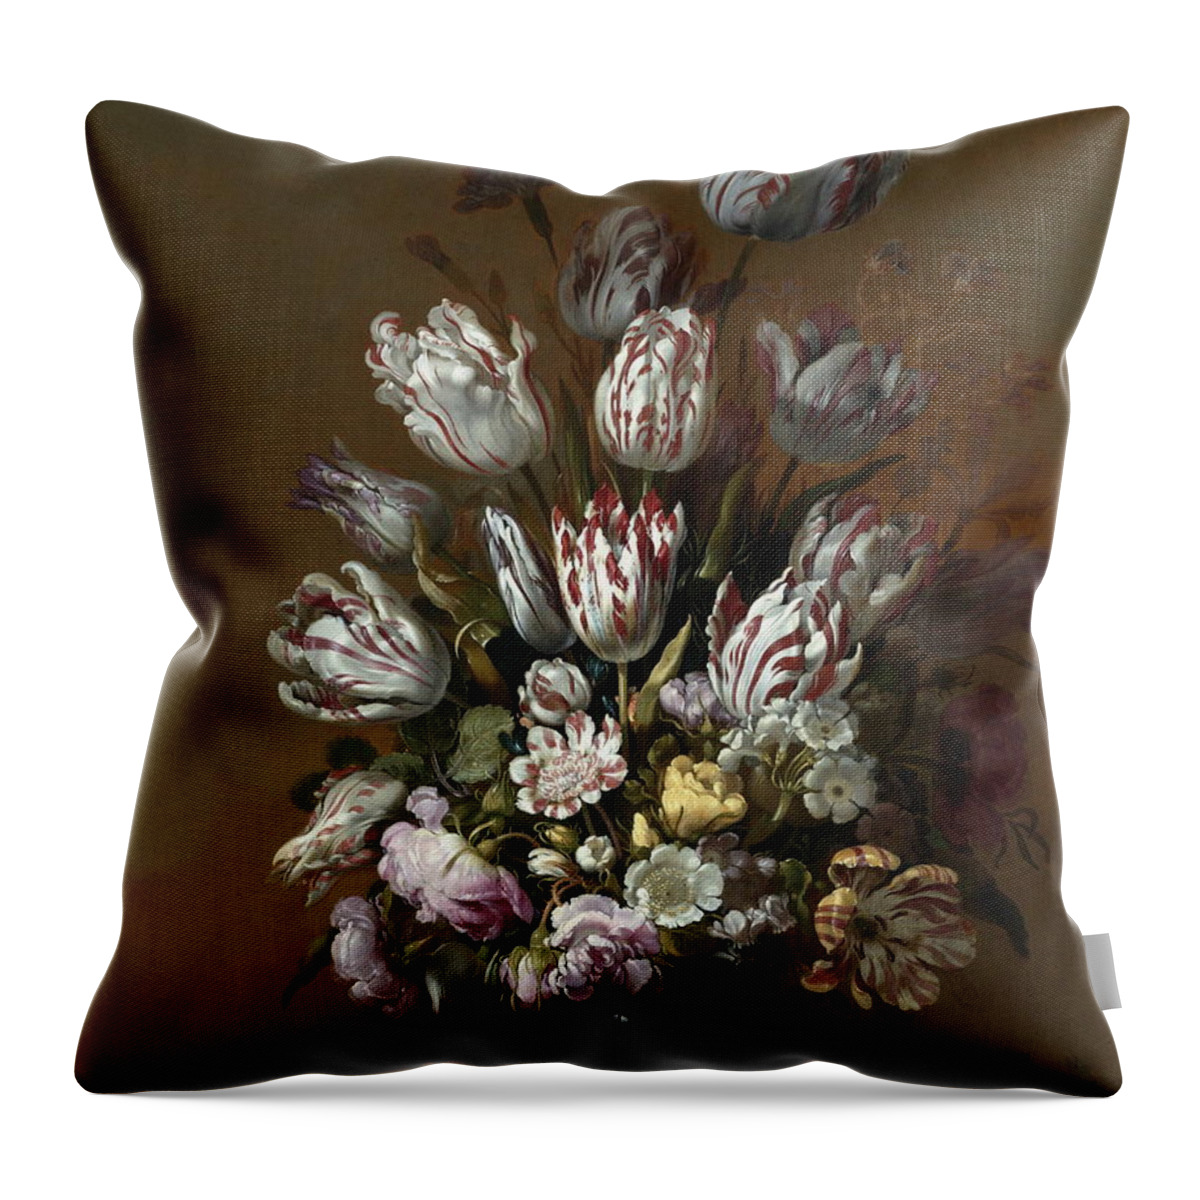 Vase Throw Pillow featuring the painting Still Life With Flowers #1 by Hans Bollongier